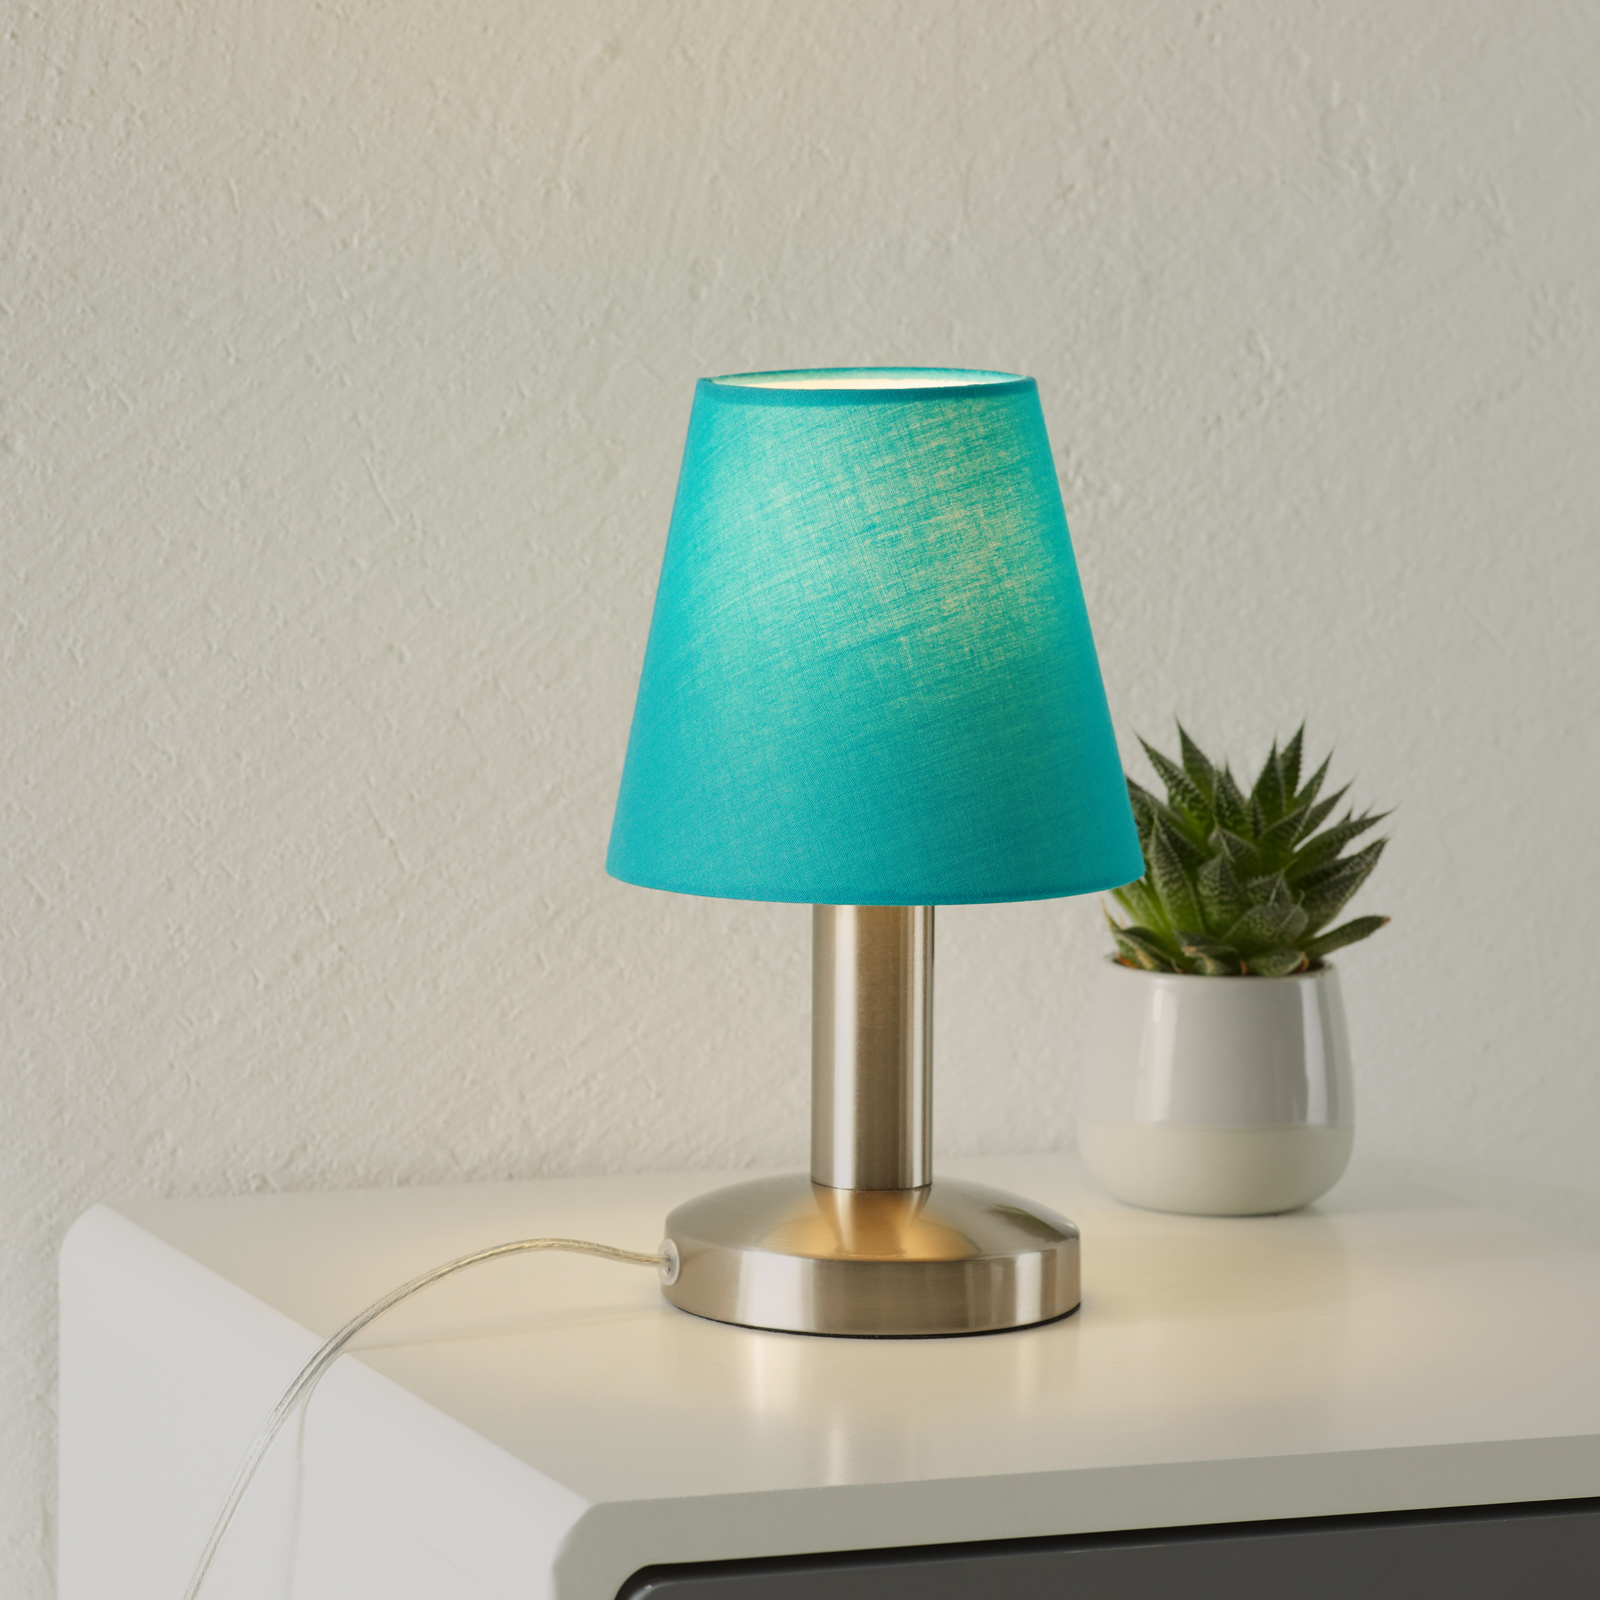 Merete table lamp with touch function, turquoise